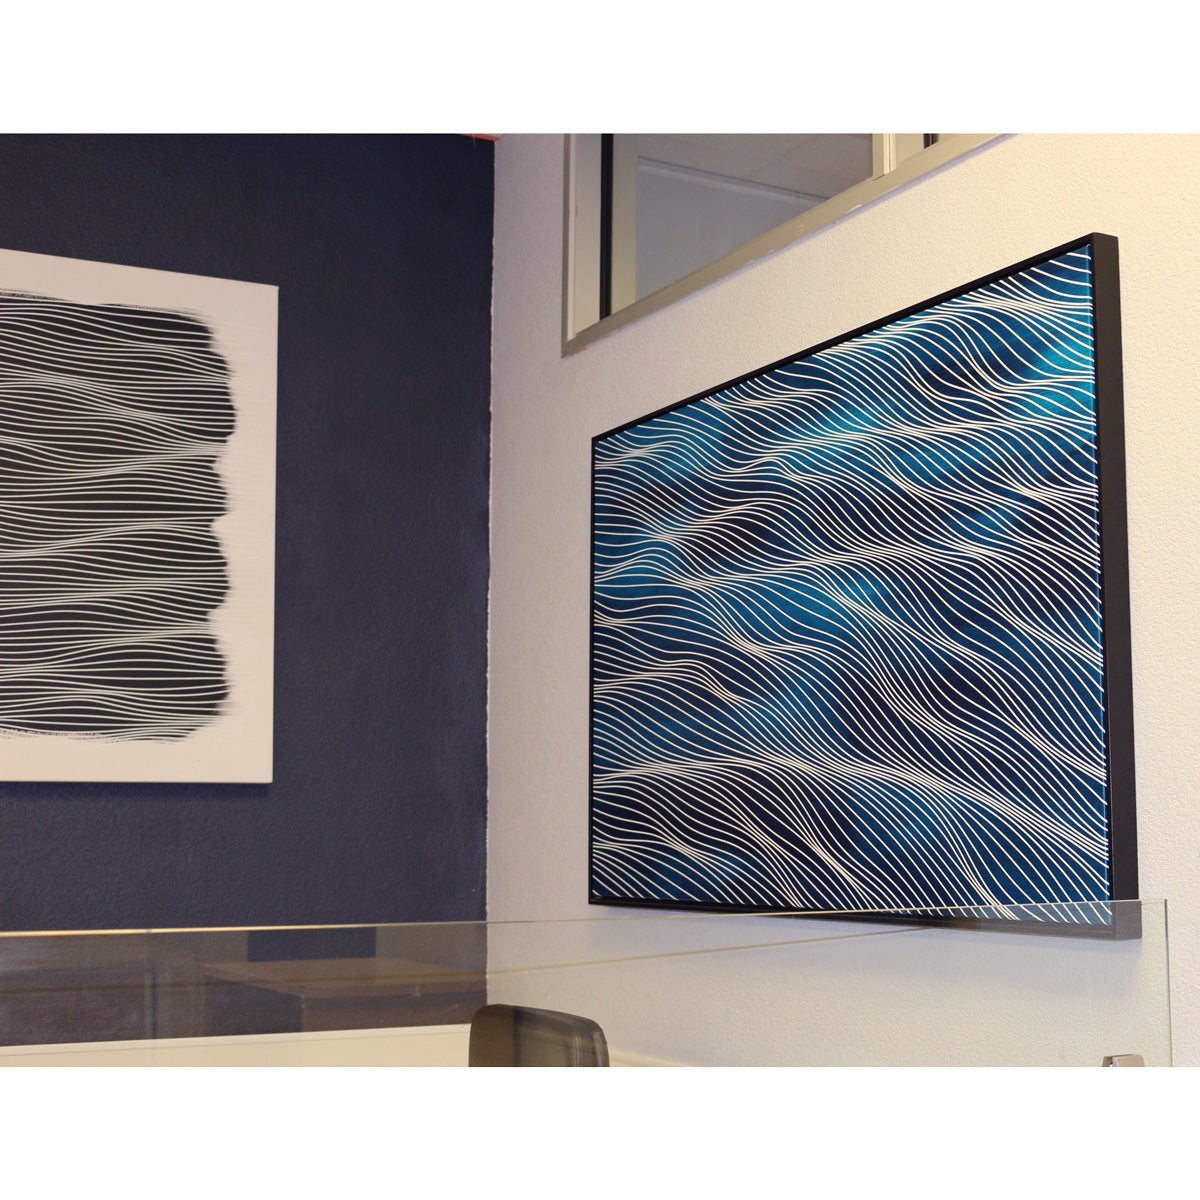 Aqua Turquoise with Black Frame 30x48 (31x49 with frame) - free shipping in USA